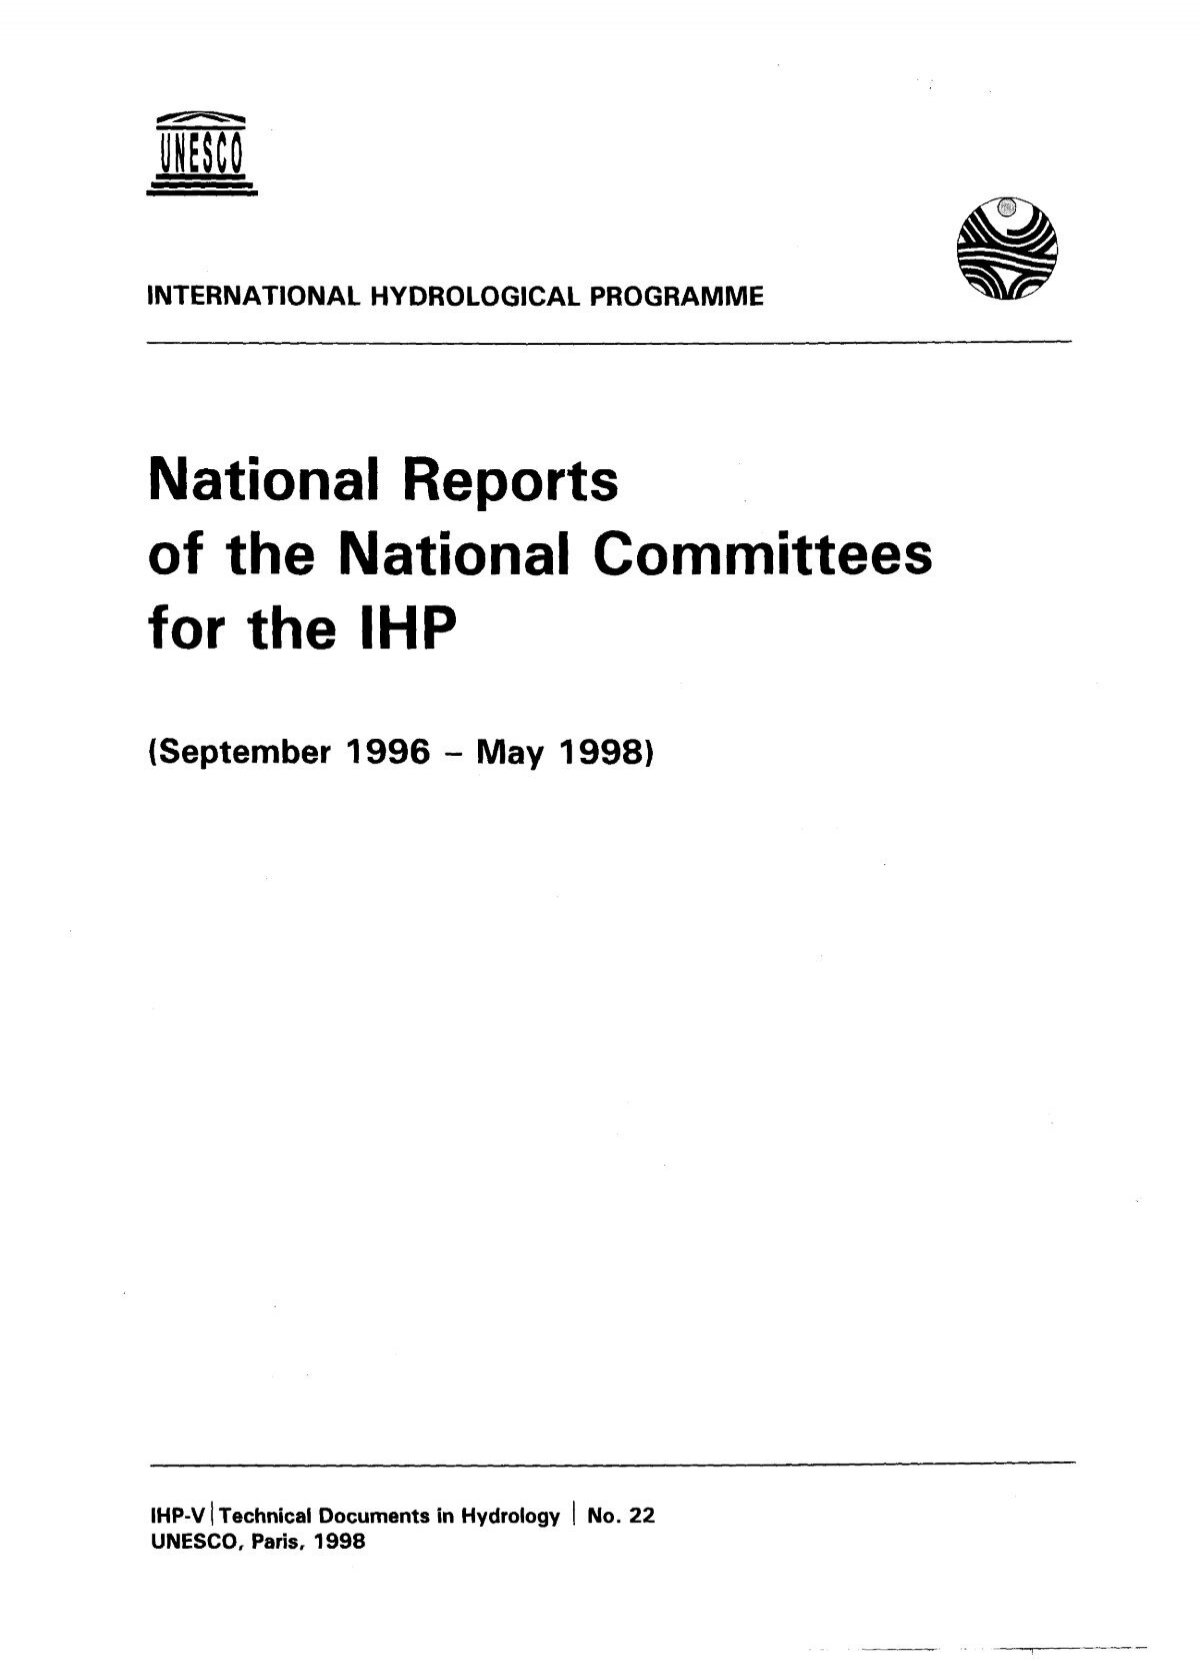 Intergovernmental Hydrological Programme National Committees